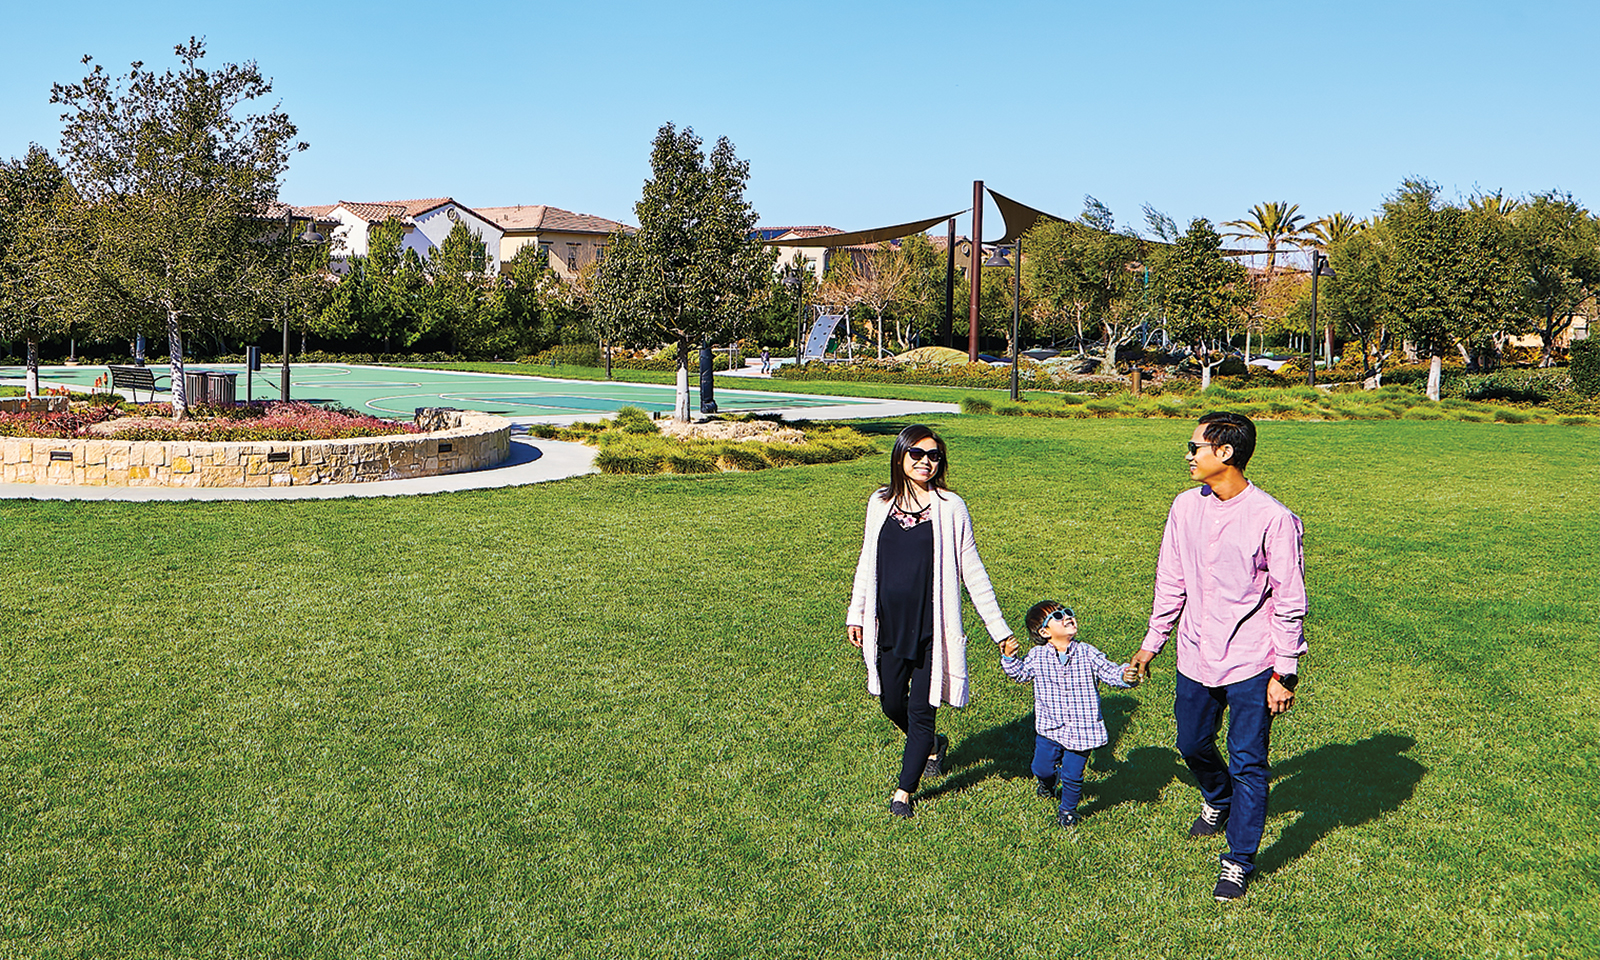 New studies rank Irvine among the top 10 healthiest cities due to its green design